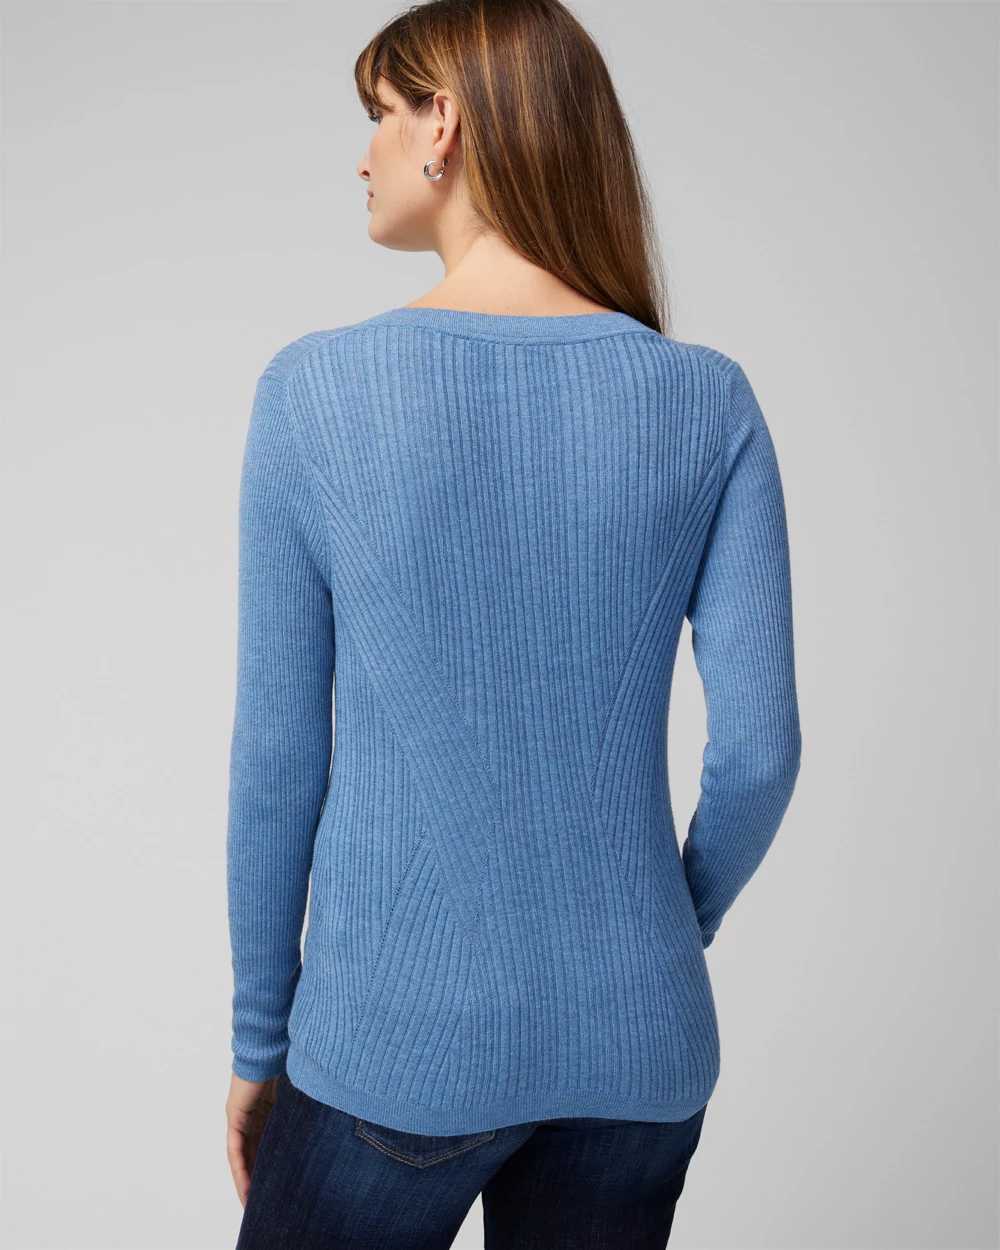 Long Sleeve Cashmere Blend V-Neck Top click to view larger image.